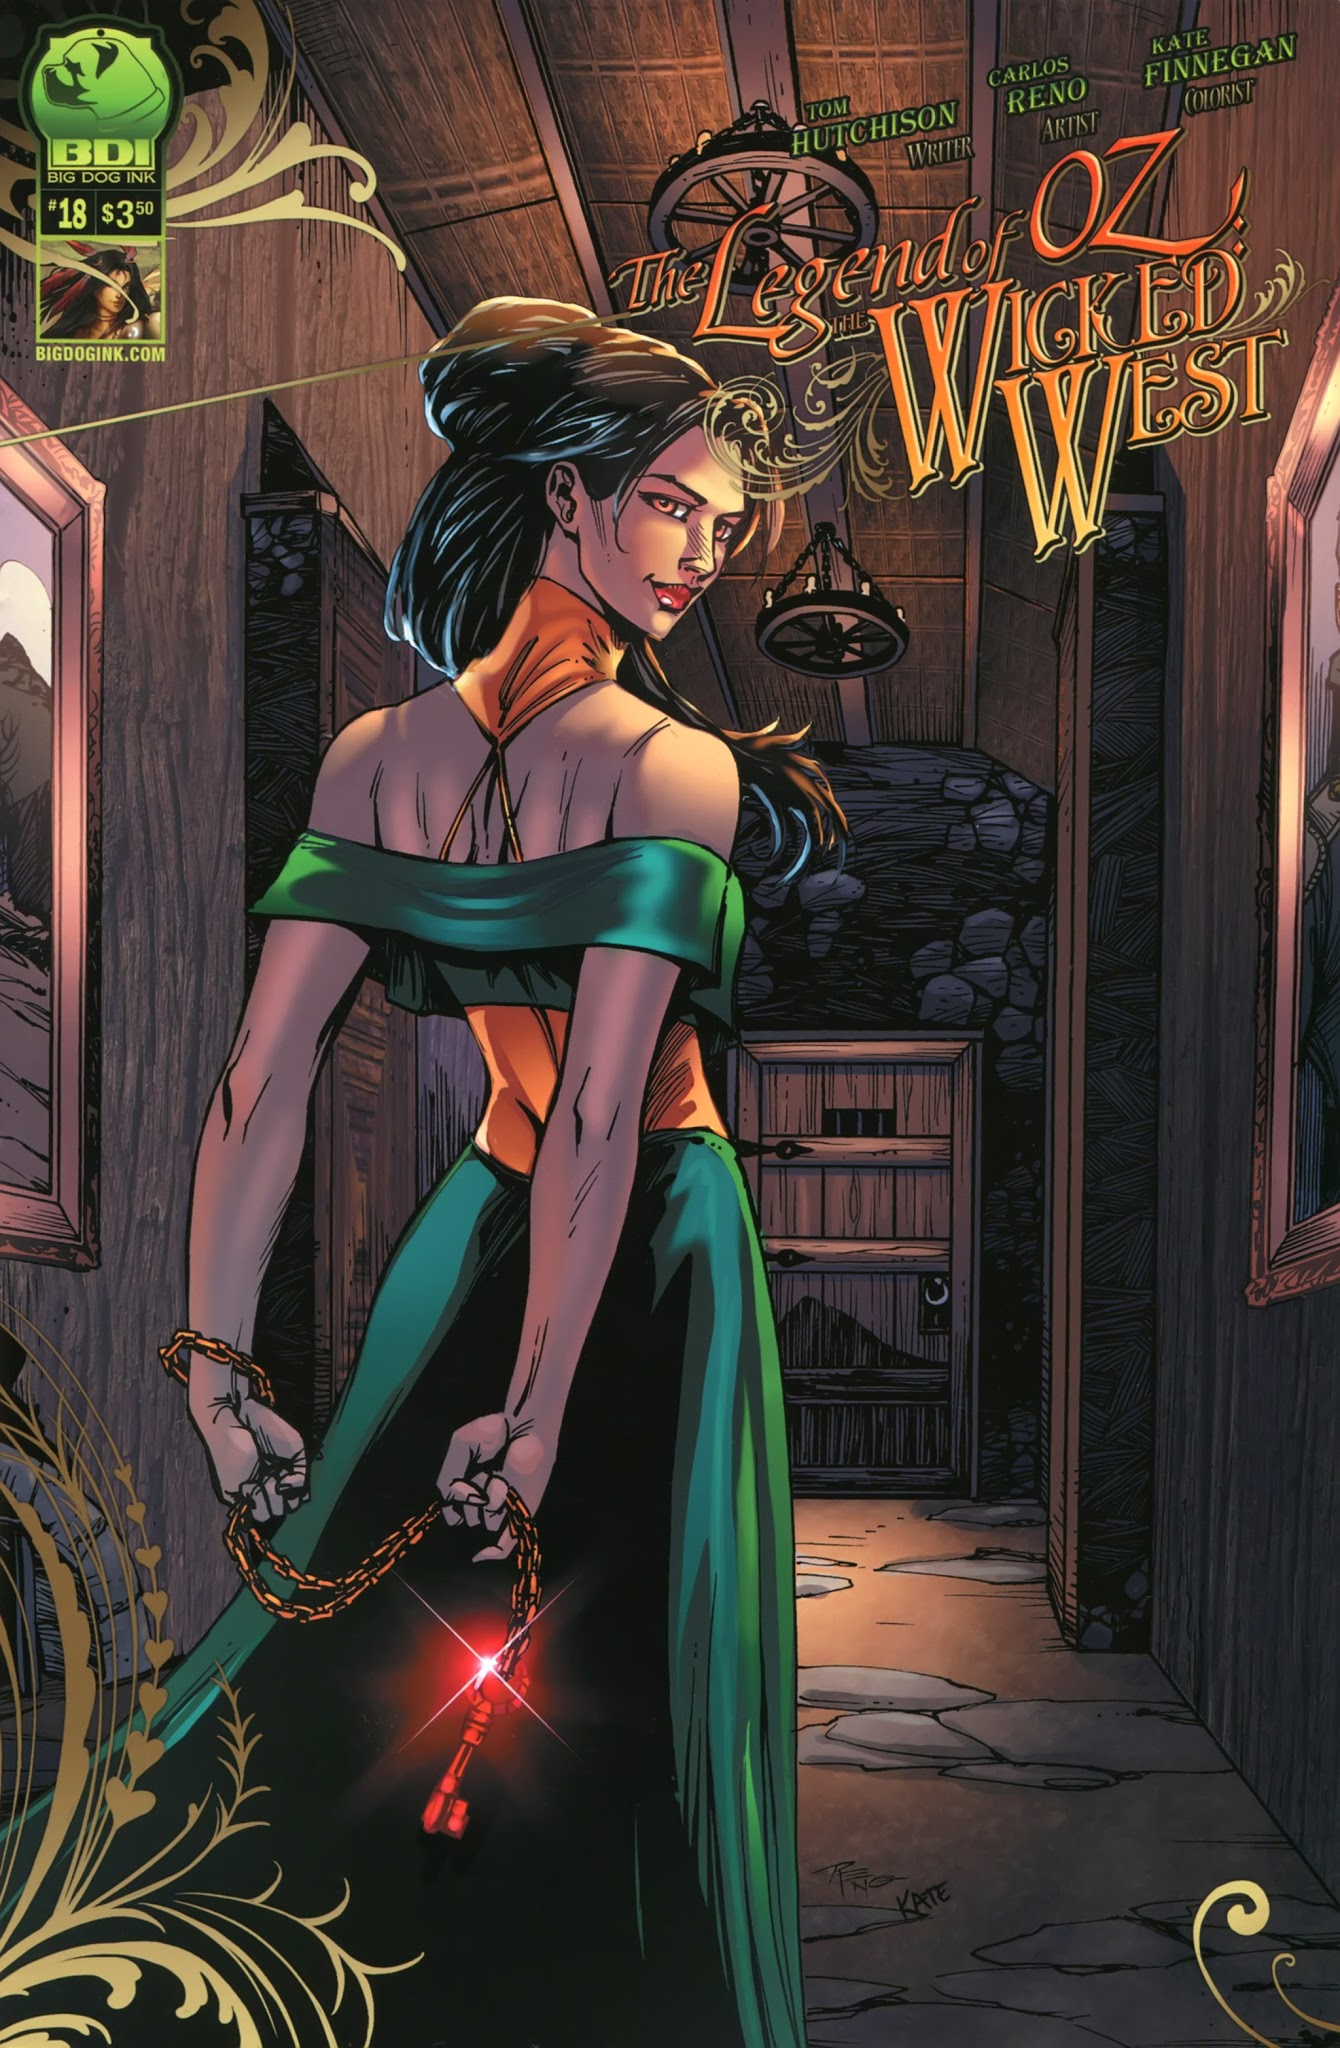 Legend of Oz: The Wicked West (2012) issue 18 - Page 1